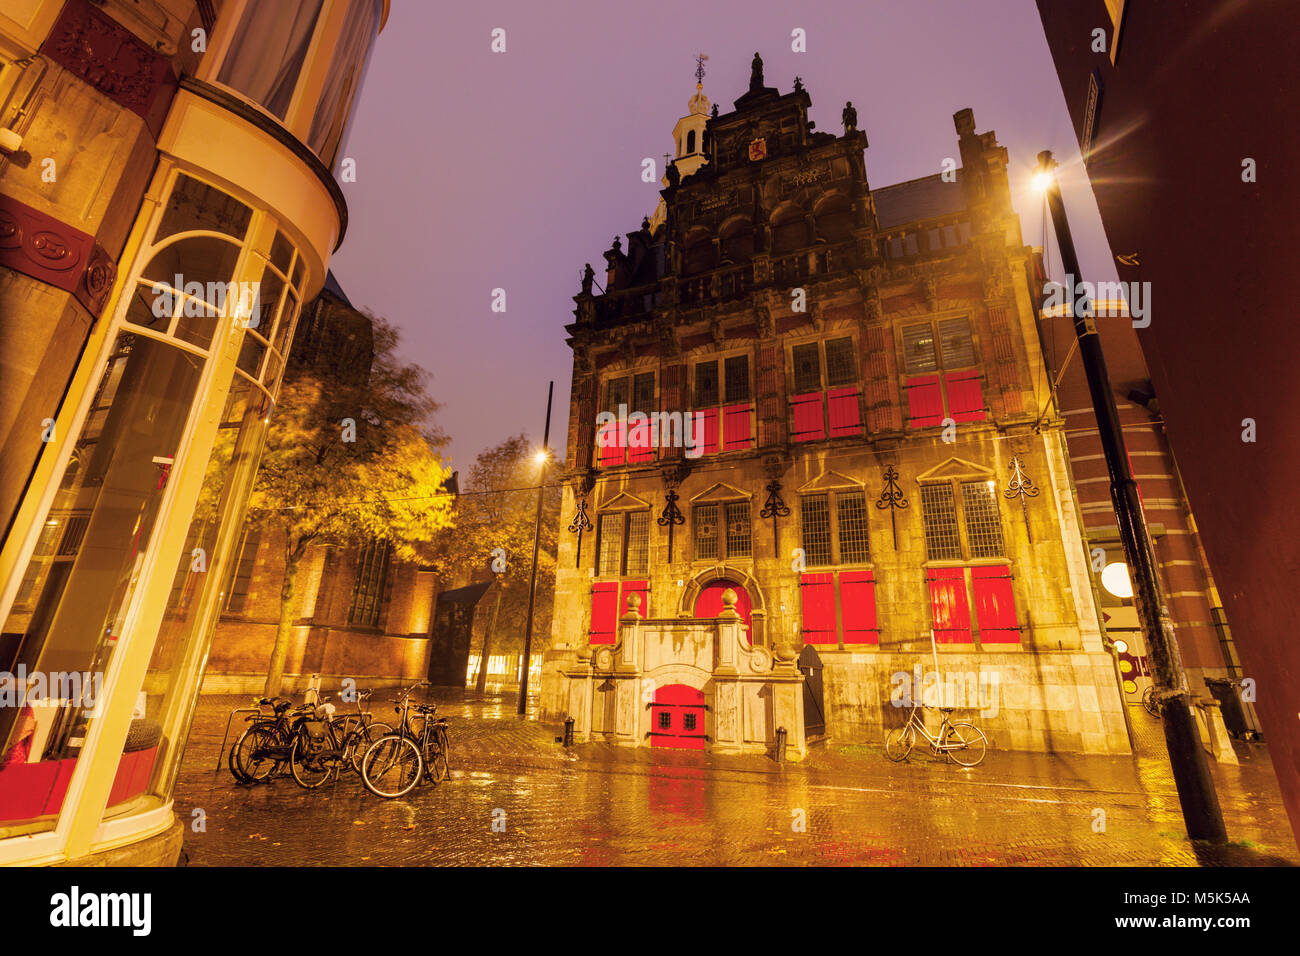 The Hague at night. The Hague, South Holland, Netherlands. Stock Photo